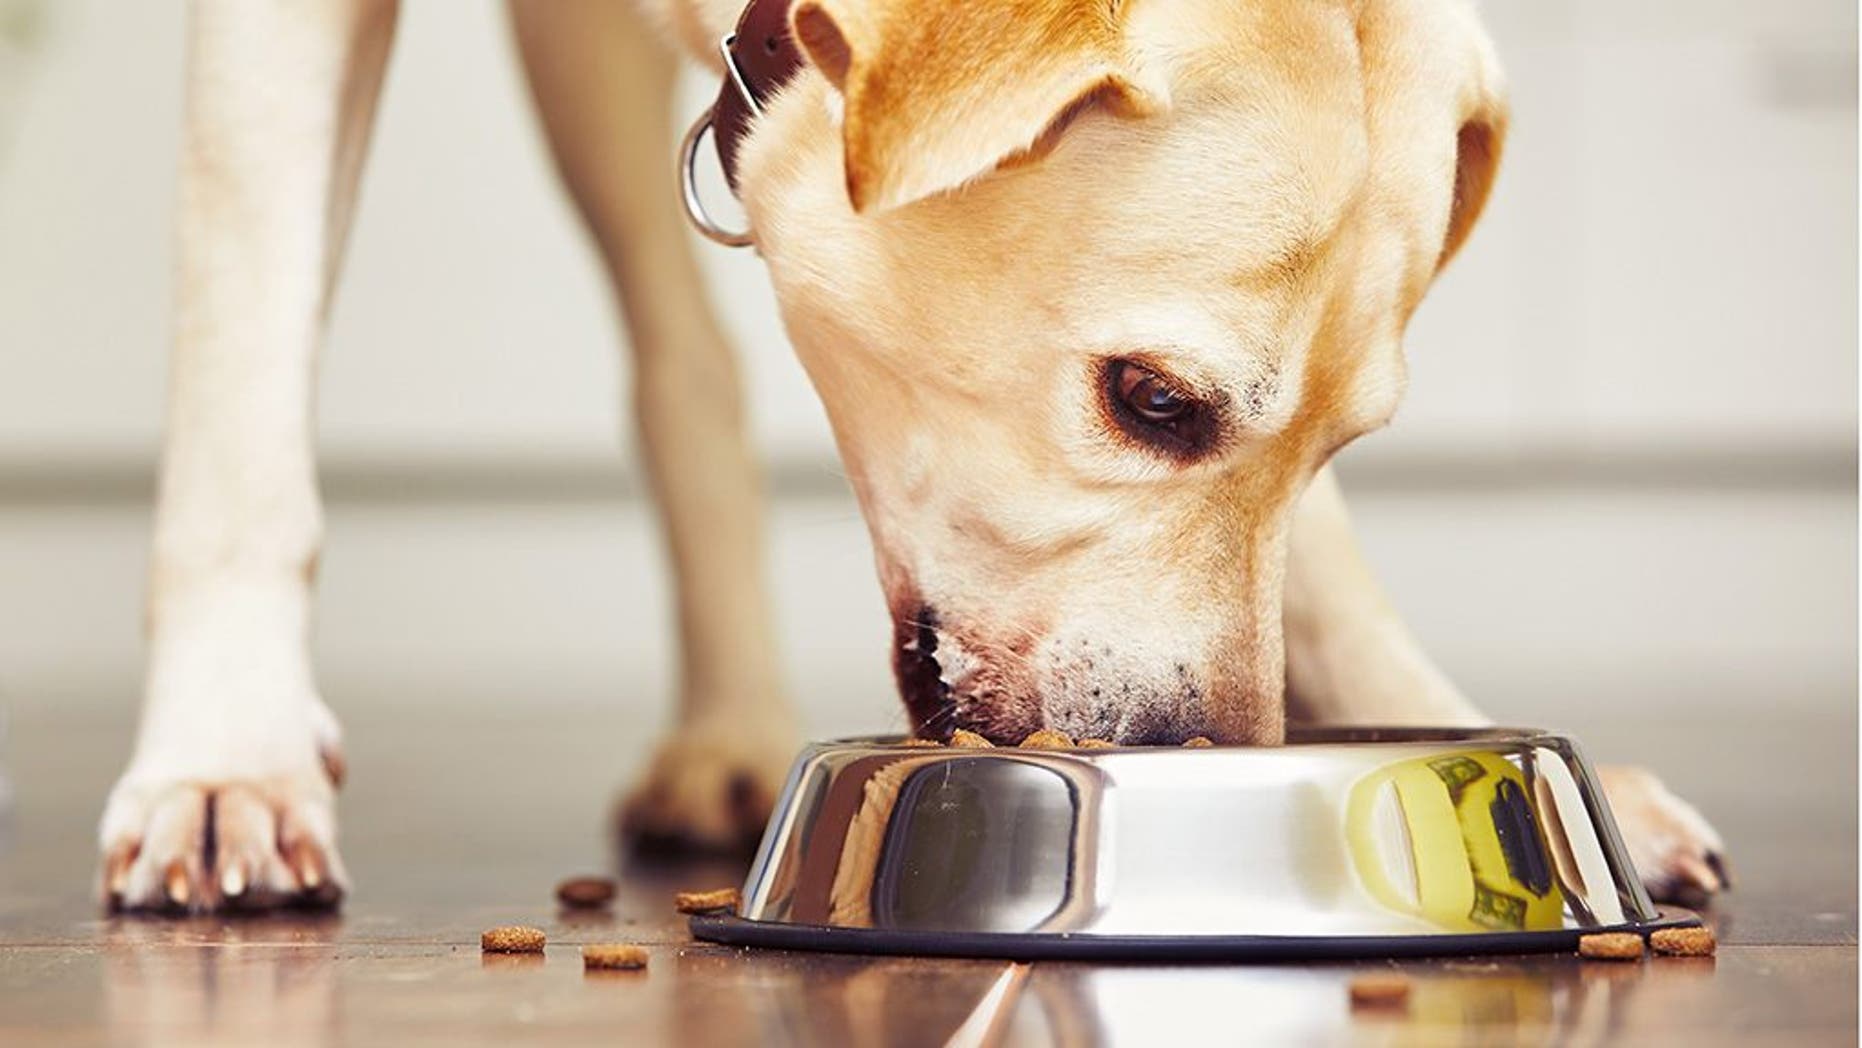 Select canned dog food recalled over vitamin D levels, FDA says